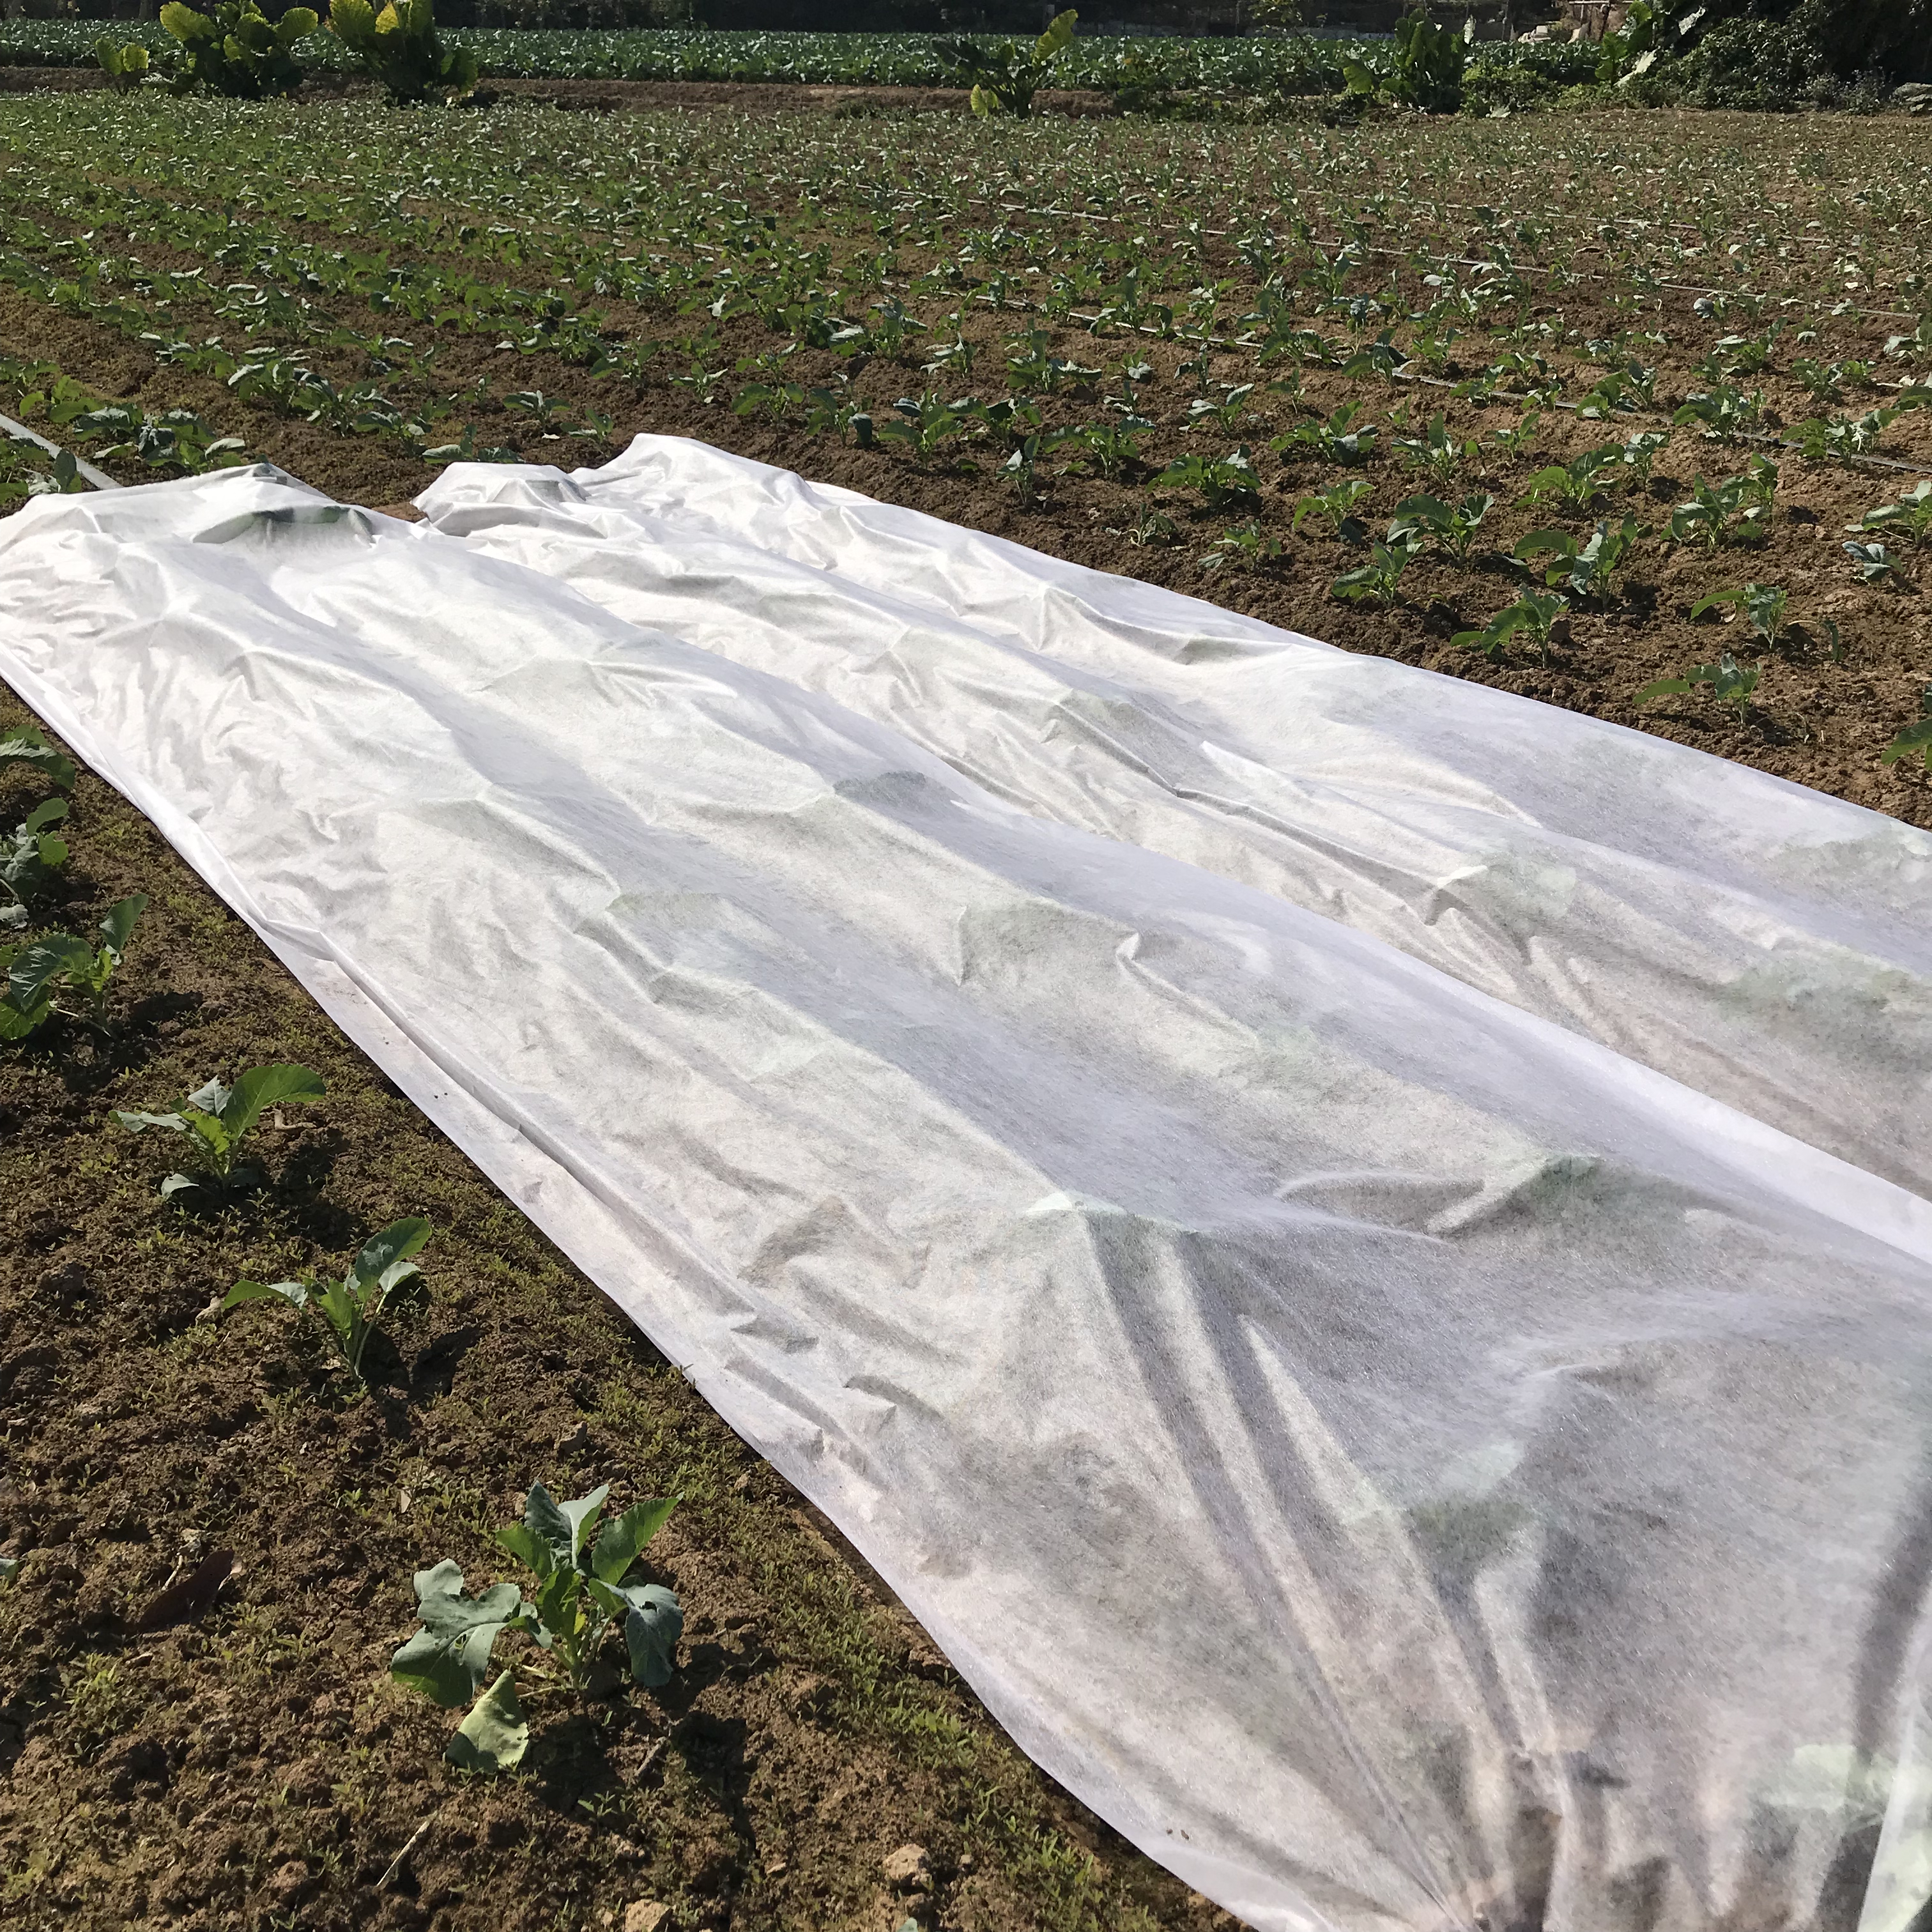 White weed control fabric agriculture thermal insulation covering planting agricultural greenhouse non-woven fabric